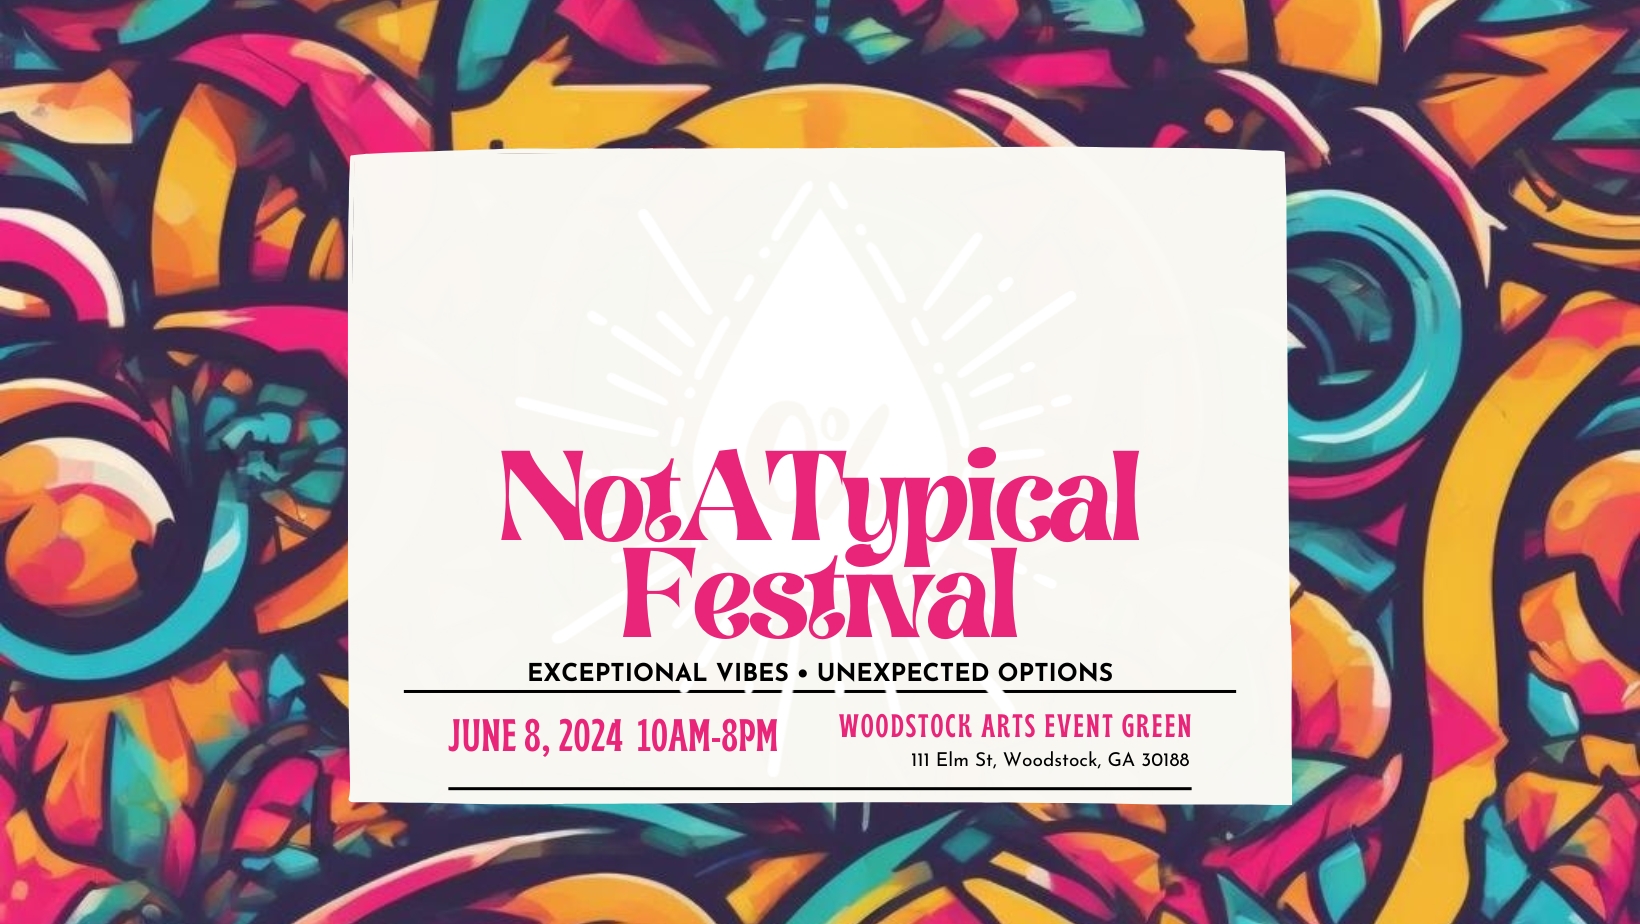 NotATypical Festival cover image